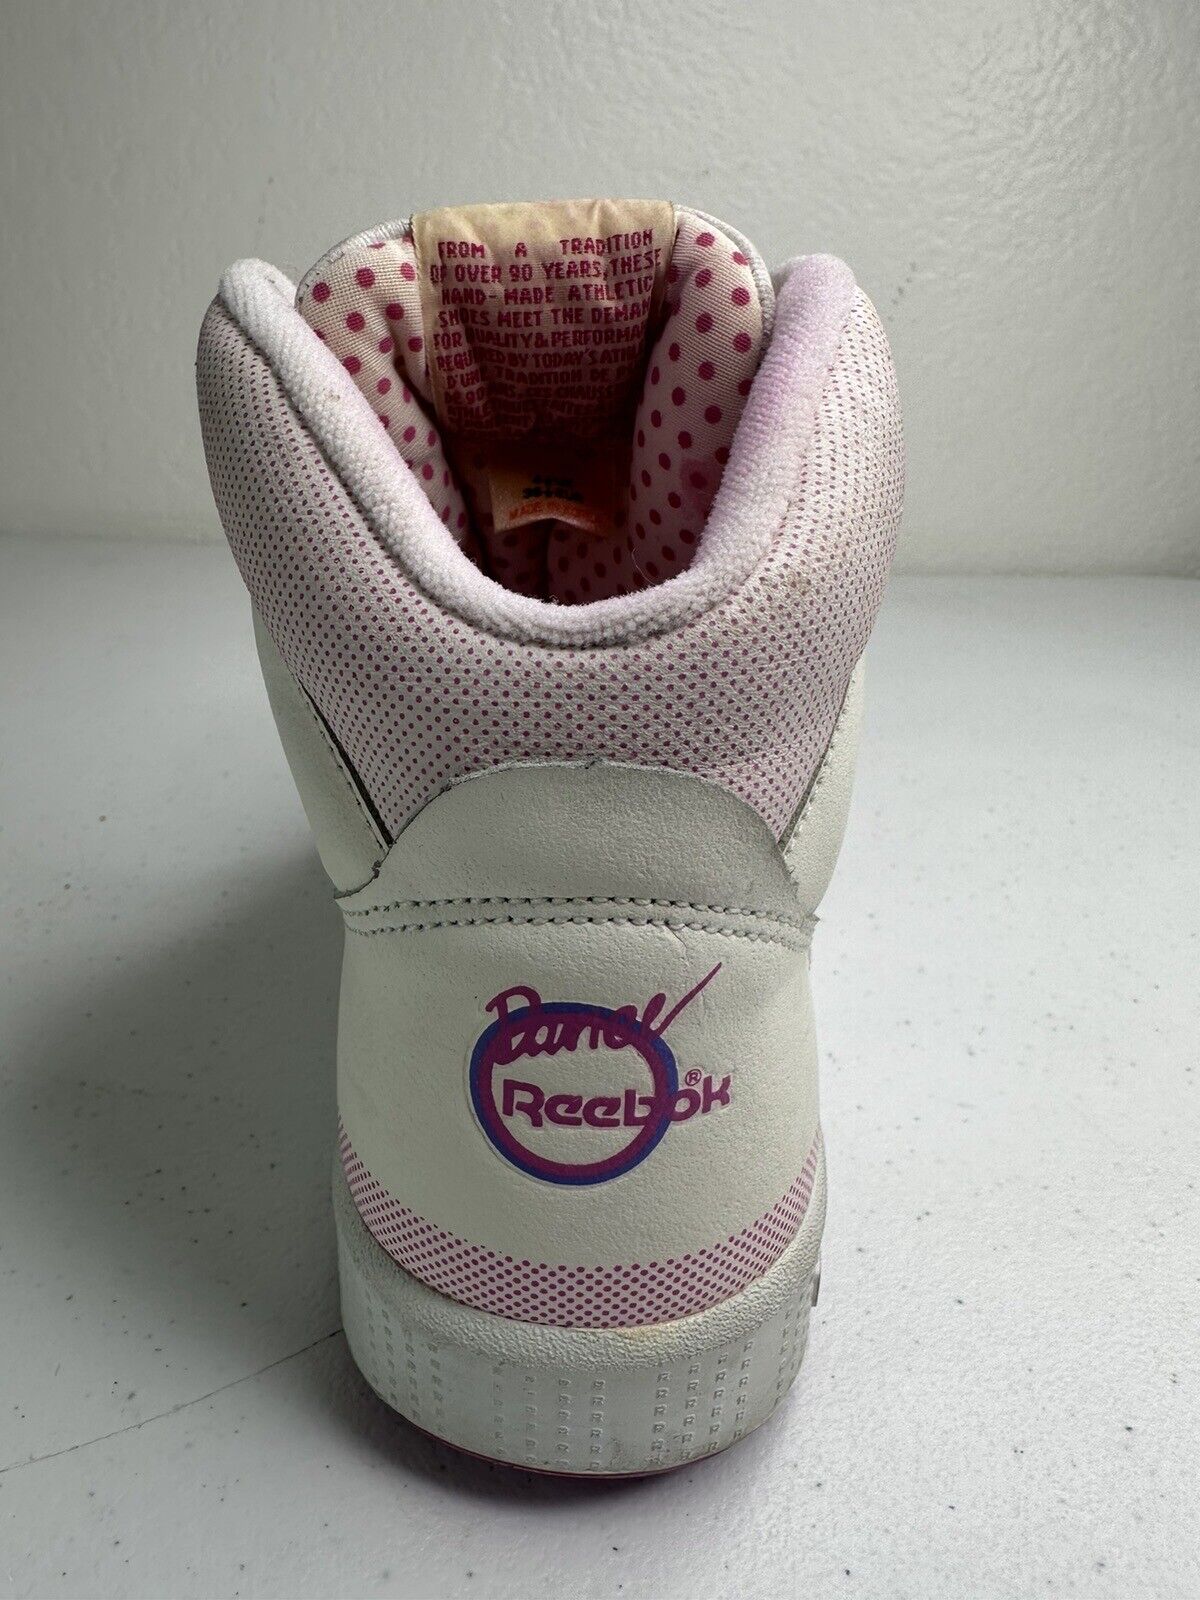 Vintage 1980s Reebok Freestyle Hi-top Dance Sneakers, Women's Size 5 - Iconic Pink & White Retro Athletic Shoes - TreasuTiques